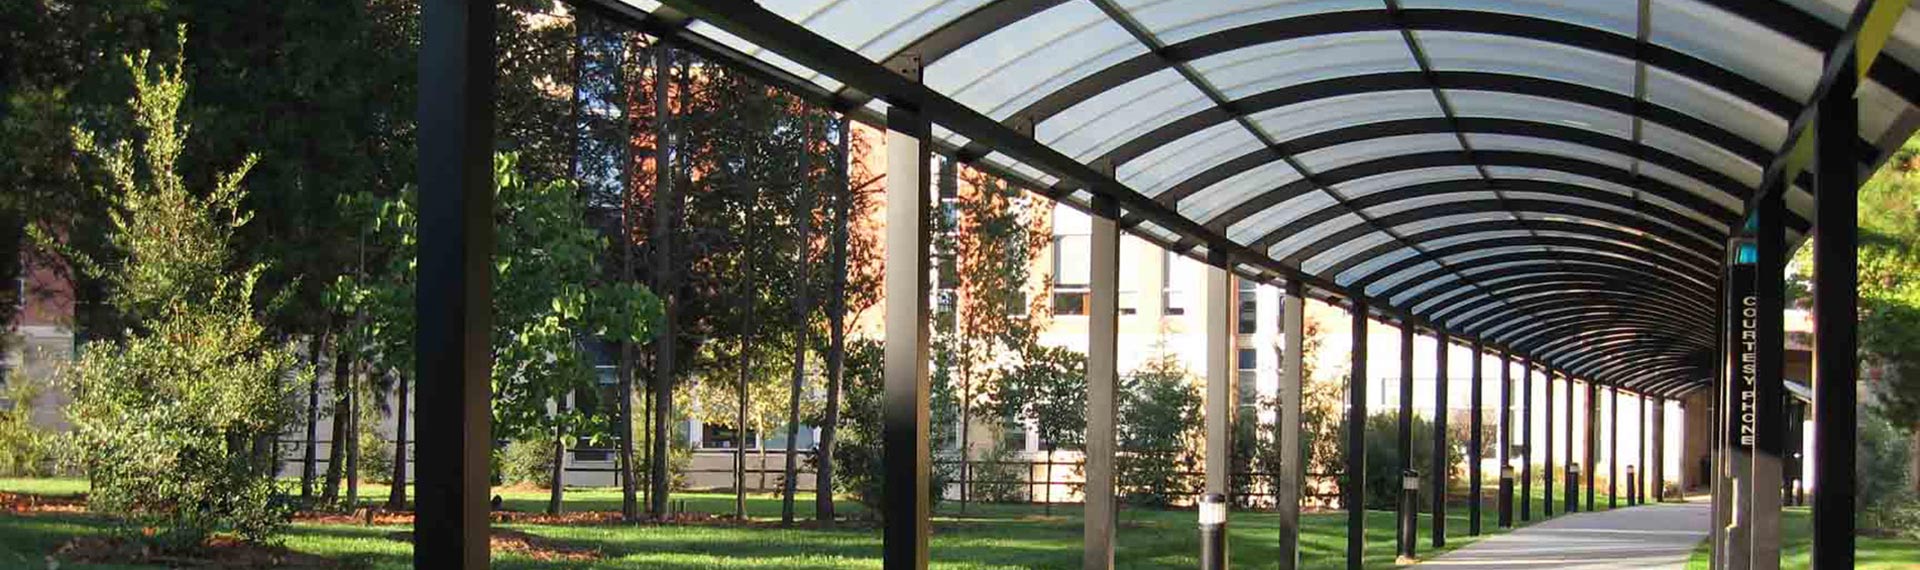 Clearspan canopy banner